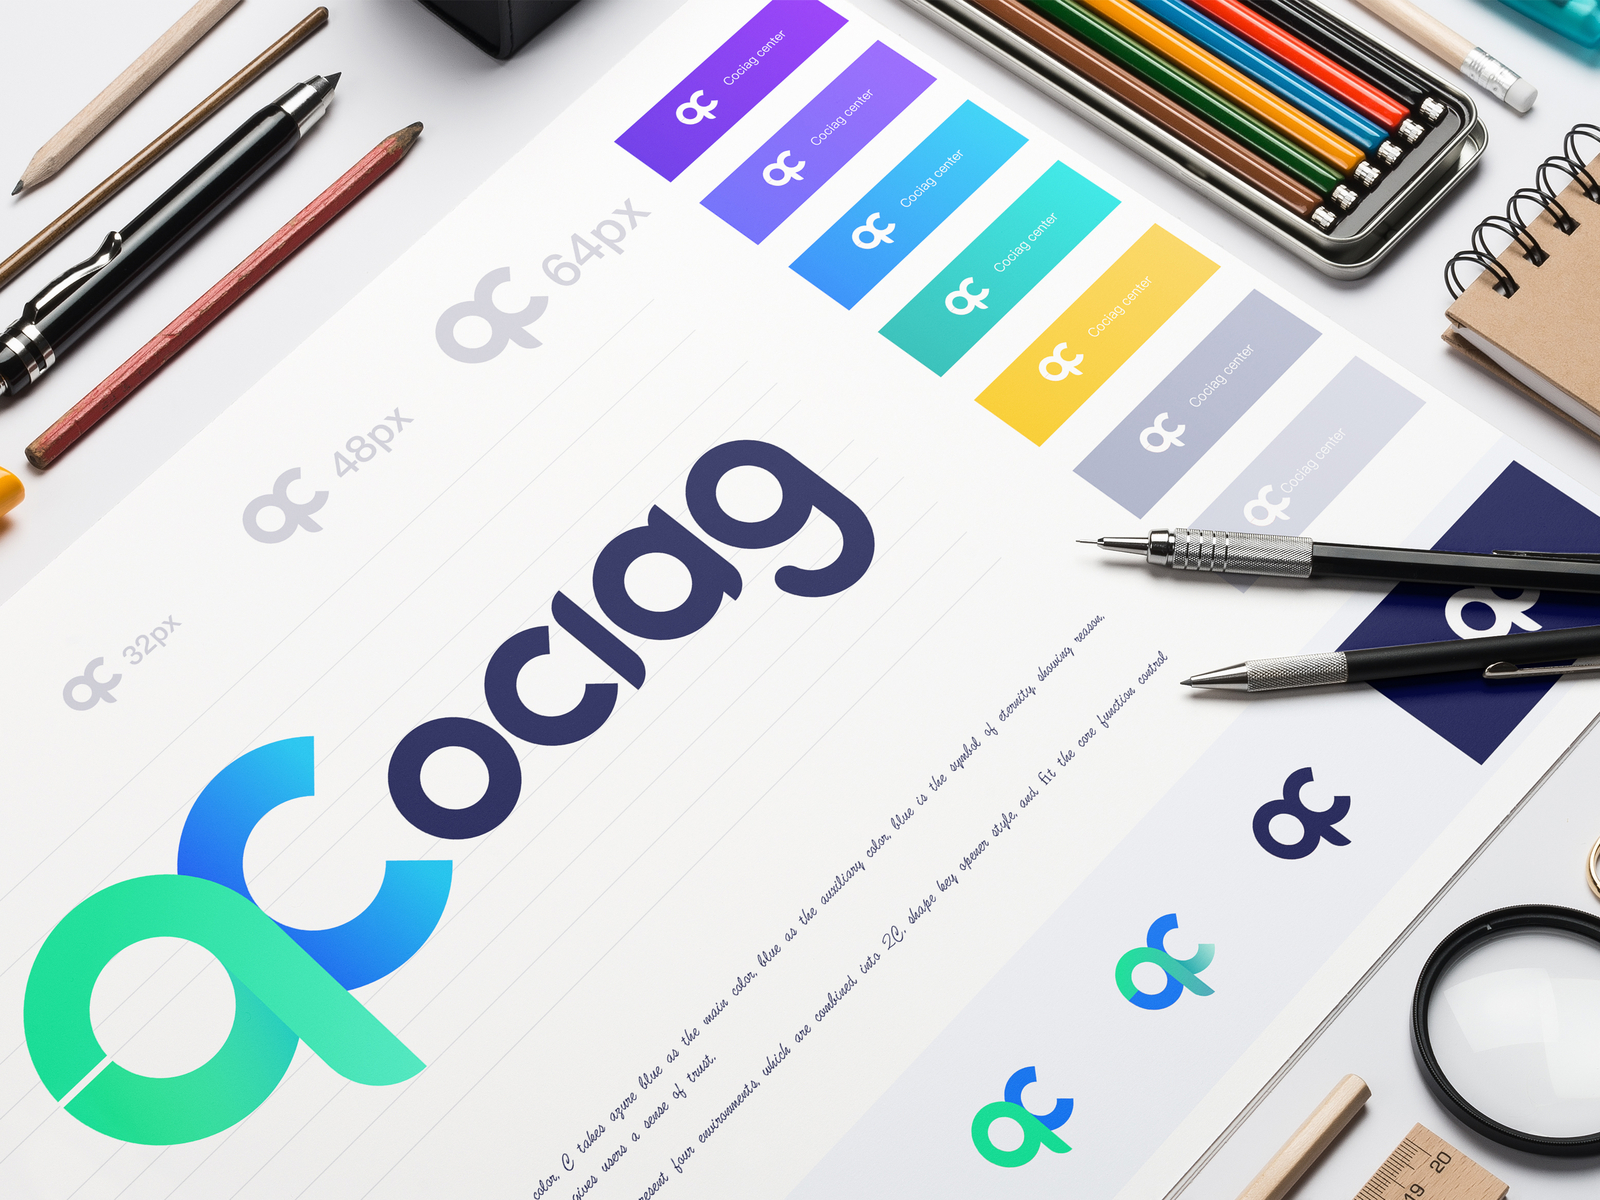 QClclag logo redesign by sammie_JN on Dribbble